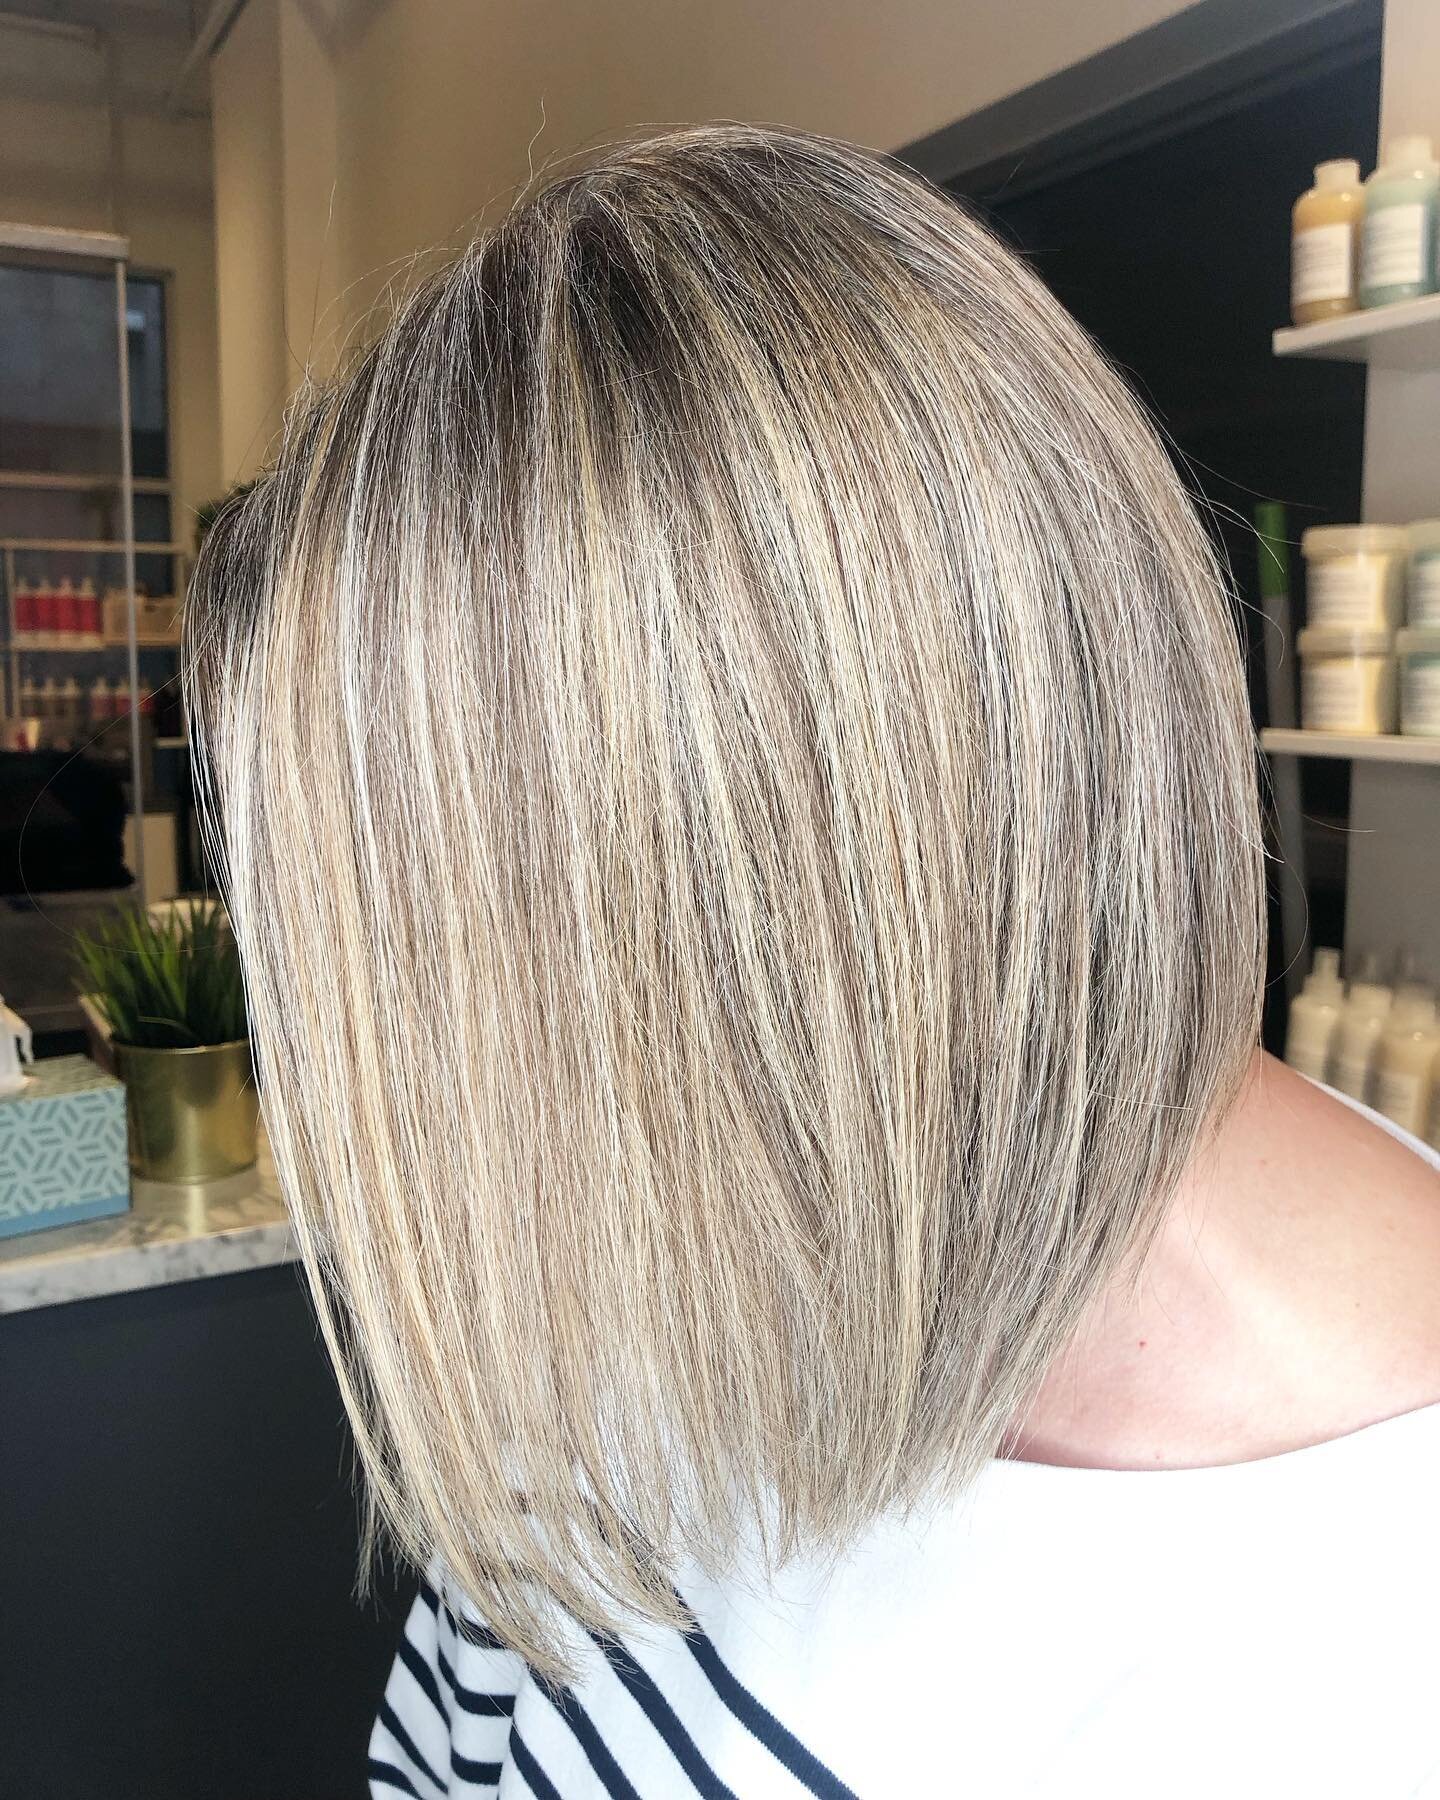 More lowlights or more highlights? Taking wagers @ alixarthurdesign.com. Booking &amp; blog links in bio.
&bull;
&bull;
&bull;
#vancouverhairstylist #vancouverbalayage #colorspecialist #blonde #lob